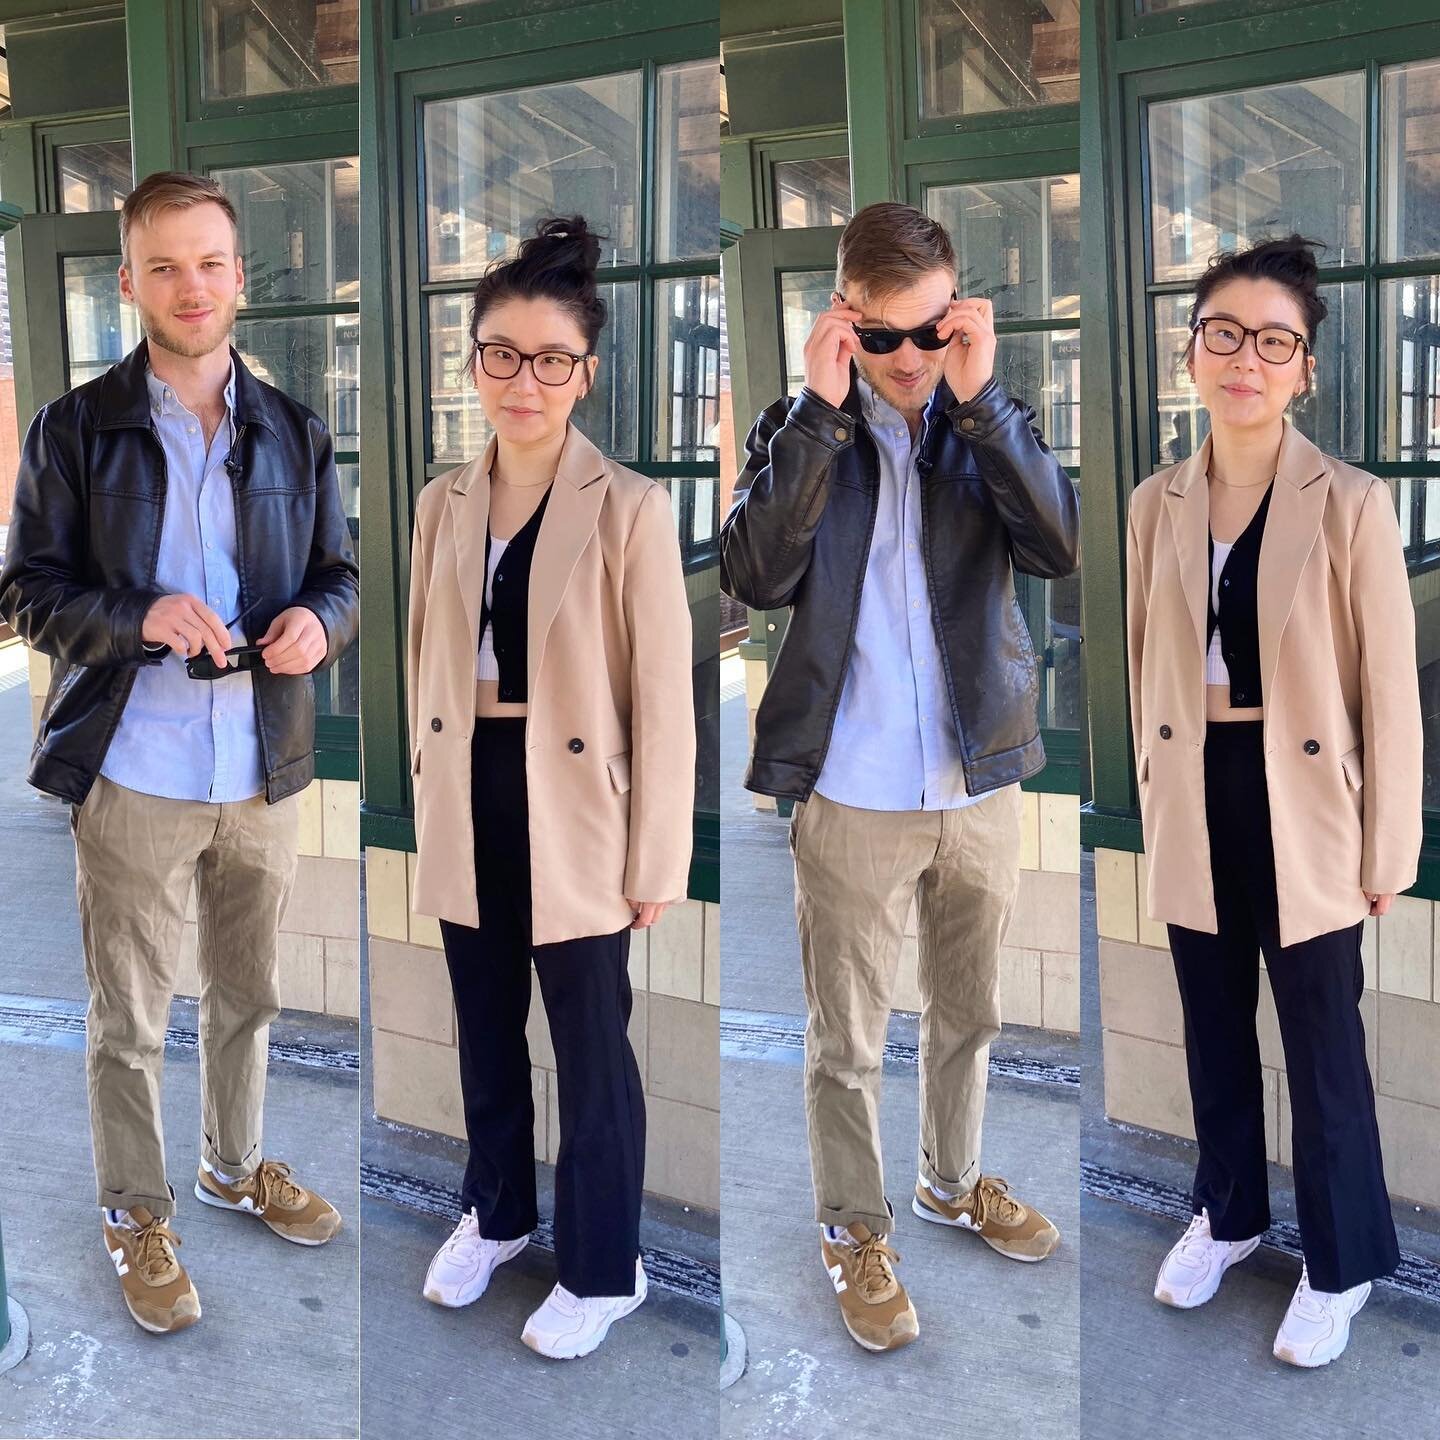 Curating one&rsquo;s insta for that inevitable USCIS interview but make it fashion. 😎

#backtowork #spring #nyc  #outfit #workoutfits #coupleoutfits #butmakeitfashion #fianc&eacute;s